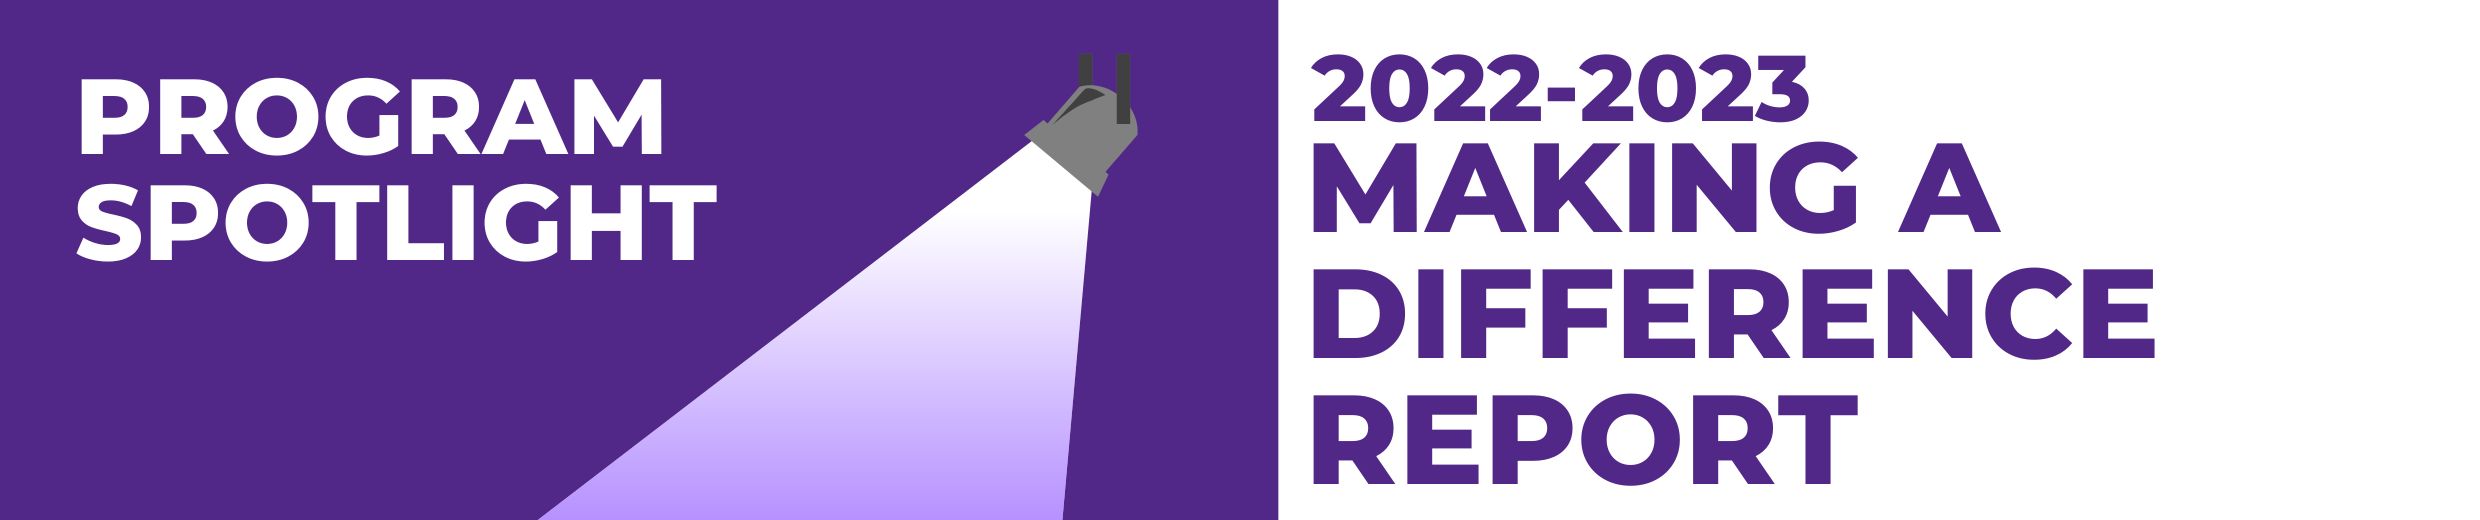 Program Spotlight: 2022-2023 Making a Difference Report